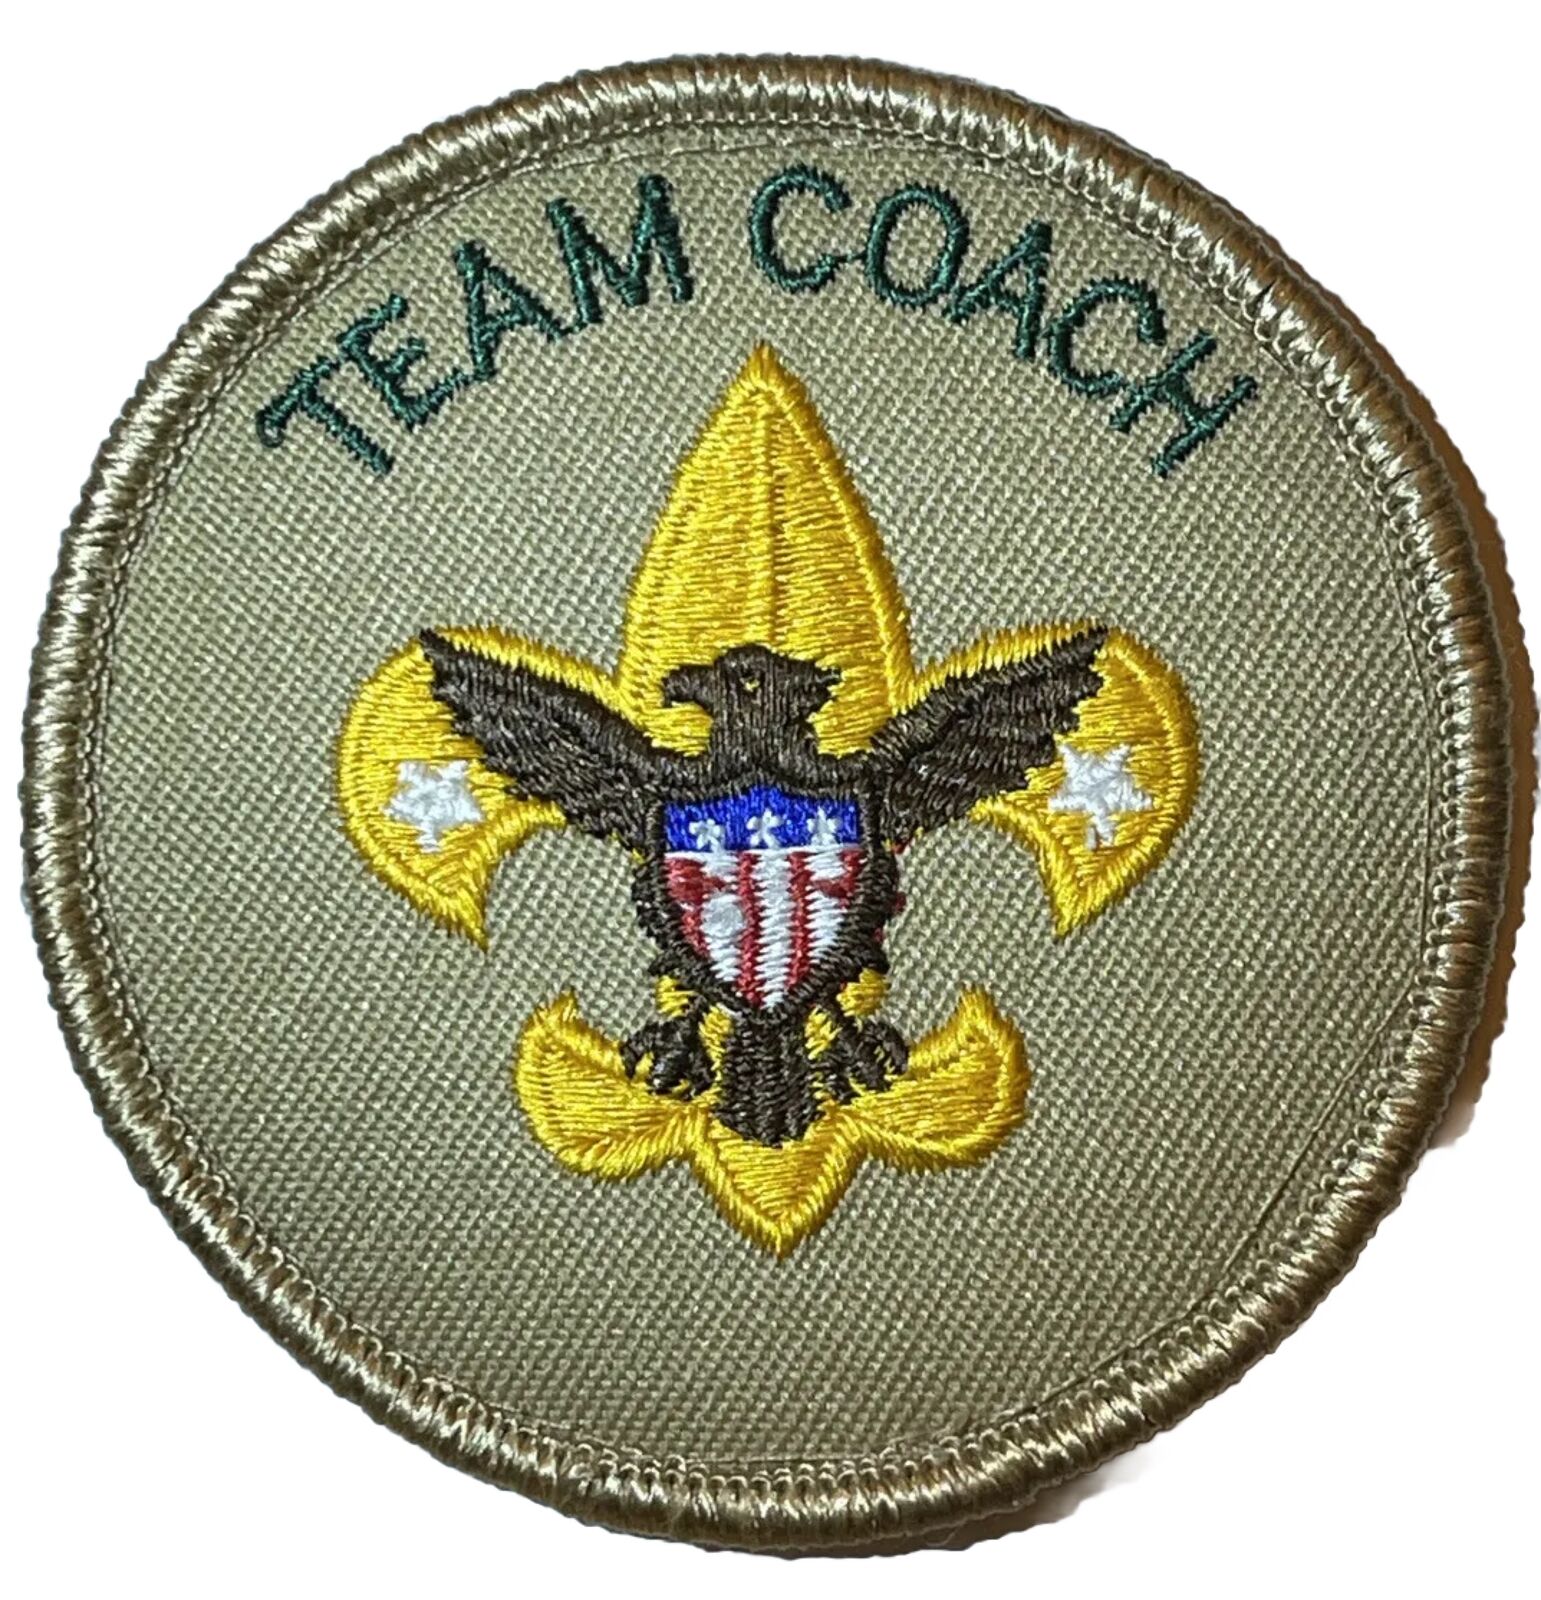 Team Coach Patch BSA Boy Scouts Of America Embroidered Badge Emblem Insignia